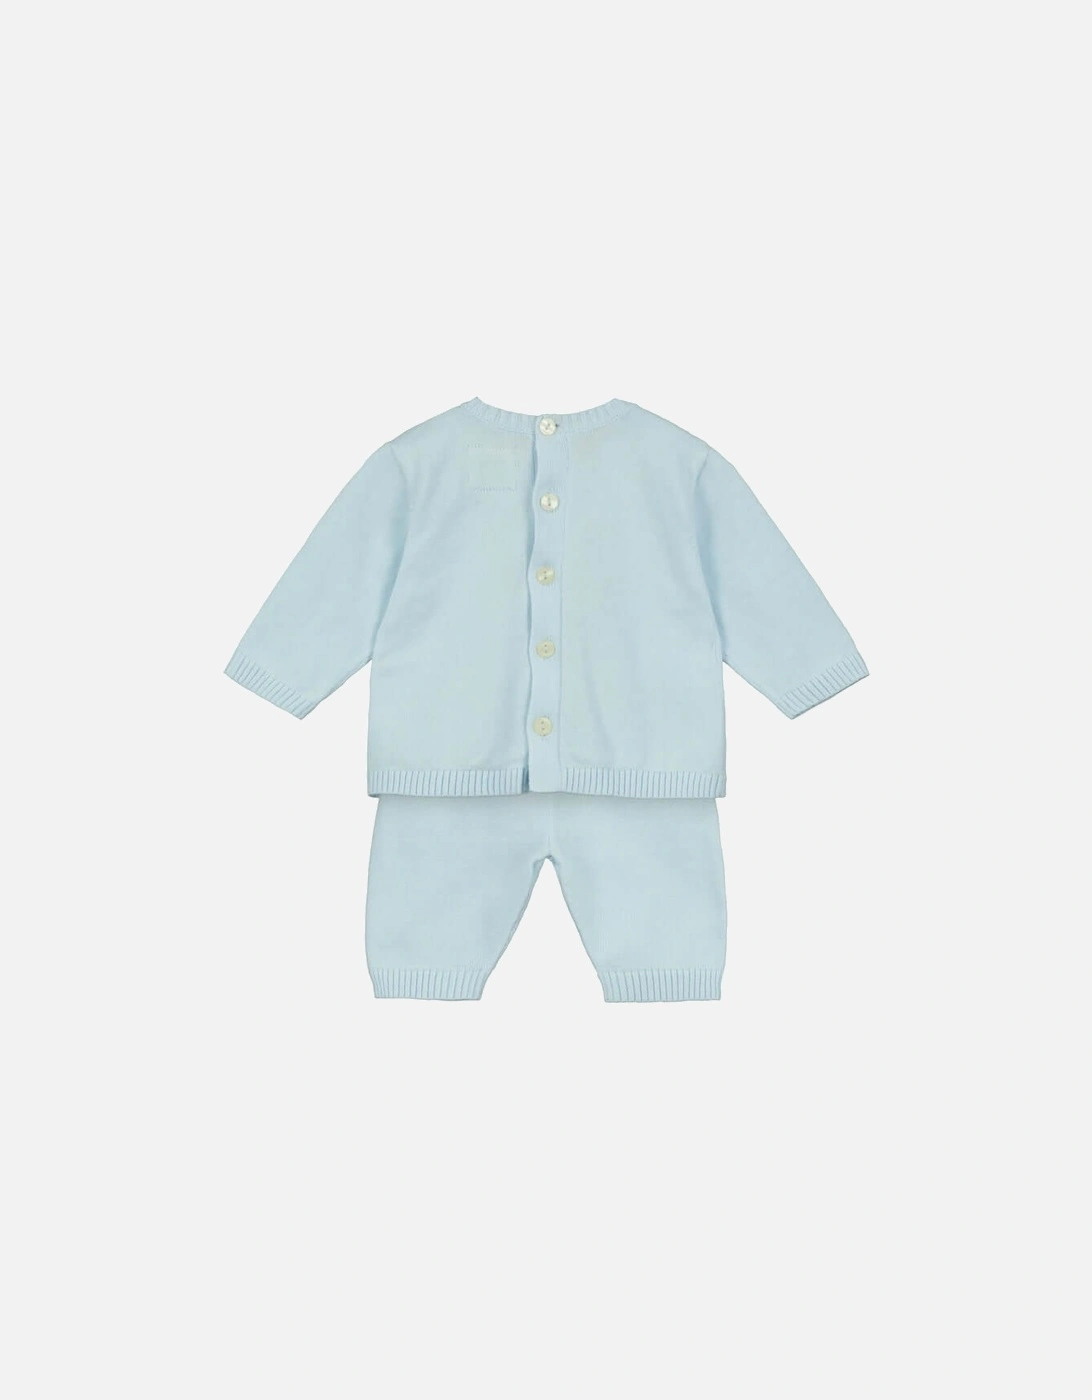 Baby Boys Enzo Blue Knitted Set with Hat